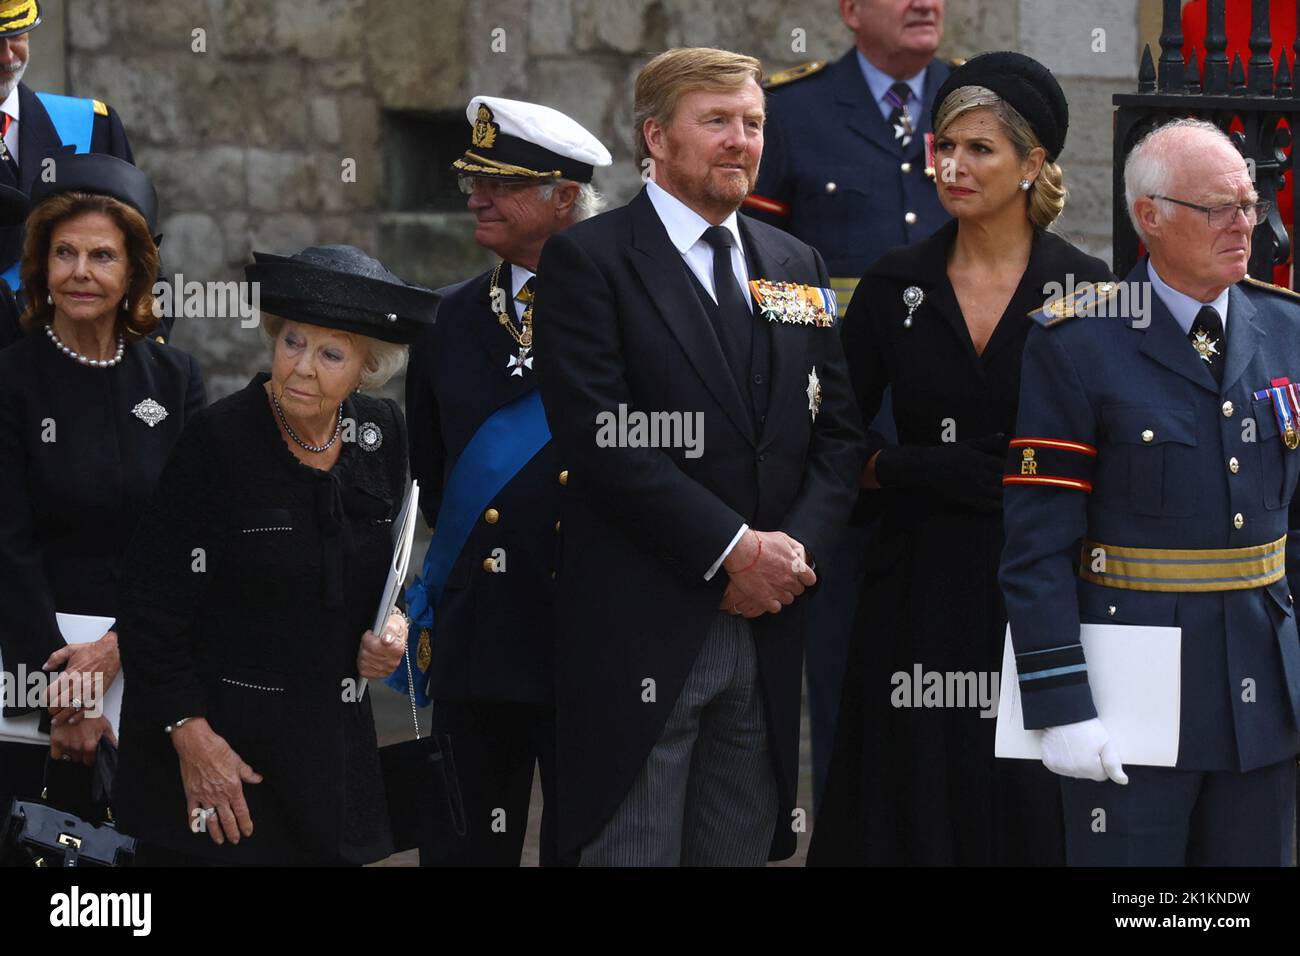 The Netherlands' King Willem-Alexander, Queen Maxima and Princess Beatrix attend the state funeral and burial of Britain's Queen Elizabeth at Westminster Abbey, in London, Britain, September 19, 2022.  REUTERS/Kai Pfaffenbach Stock Photo